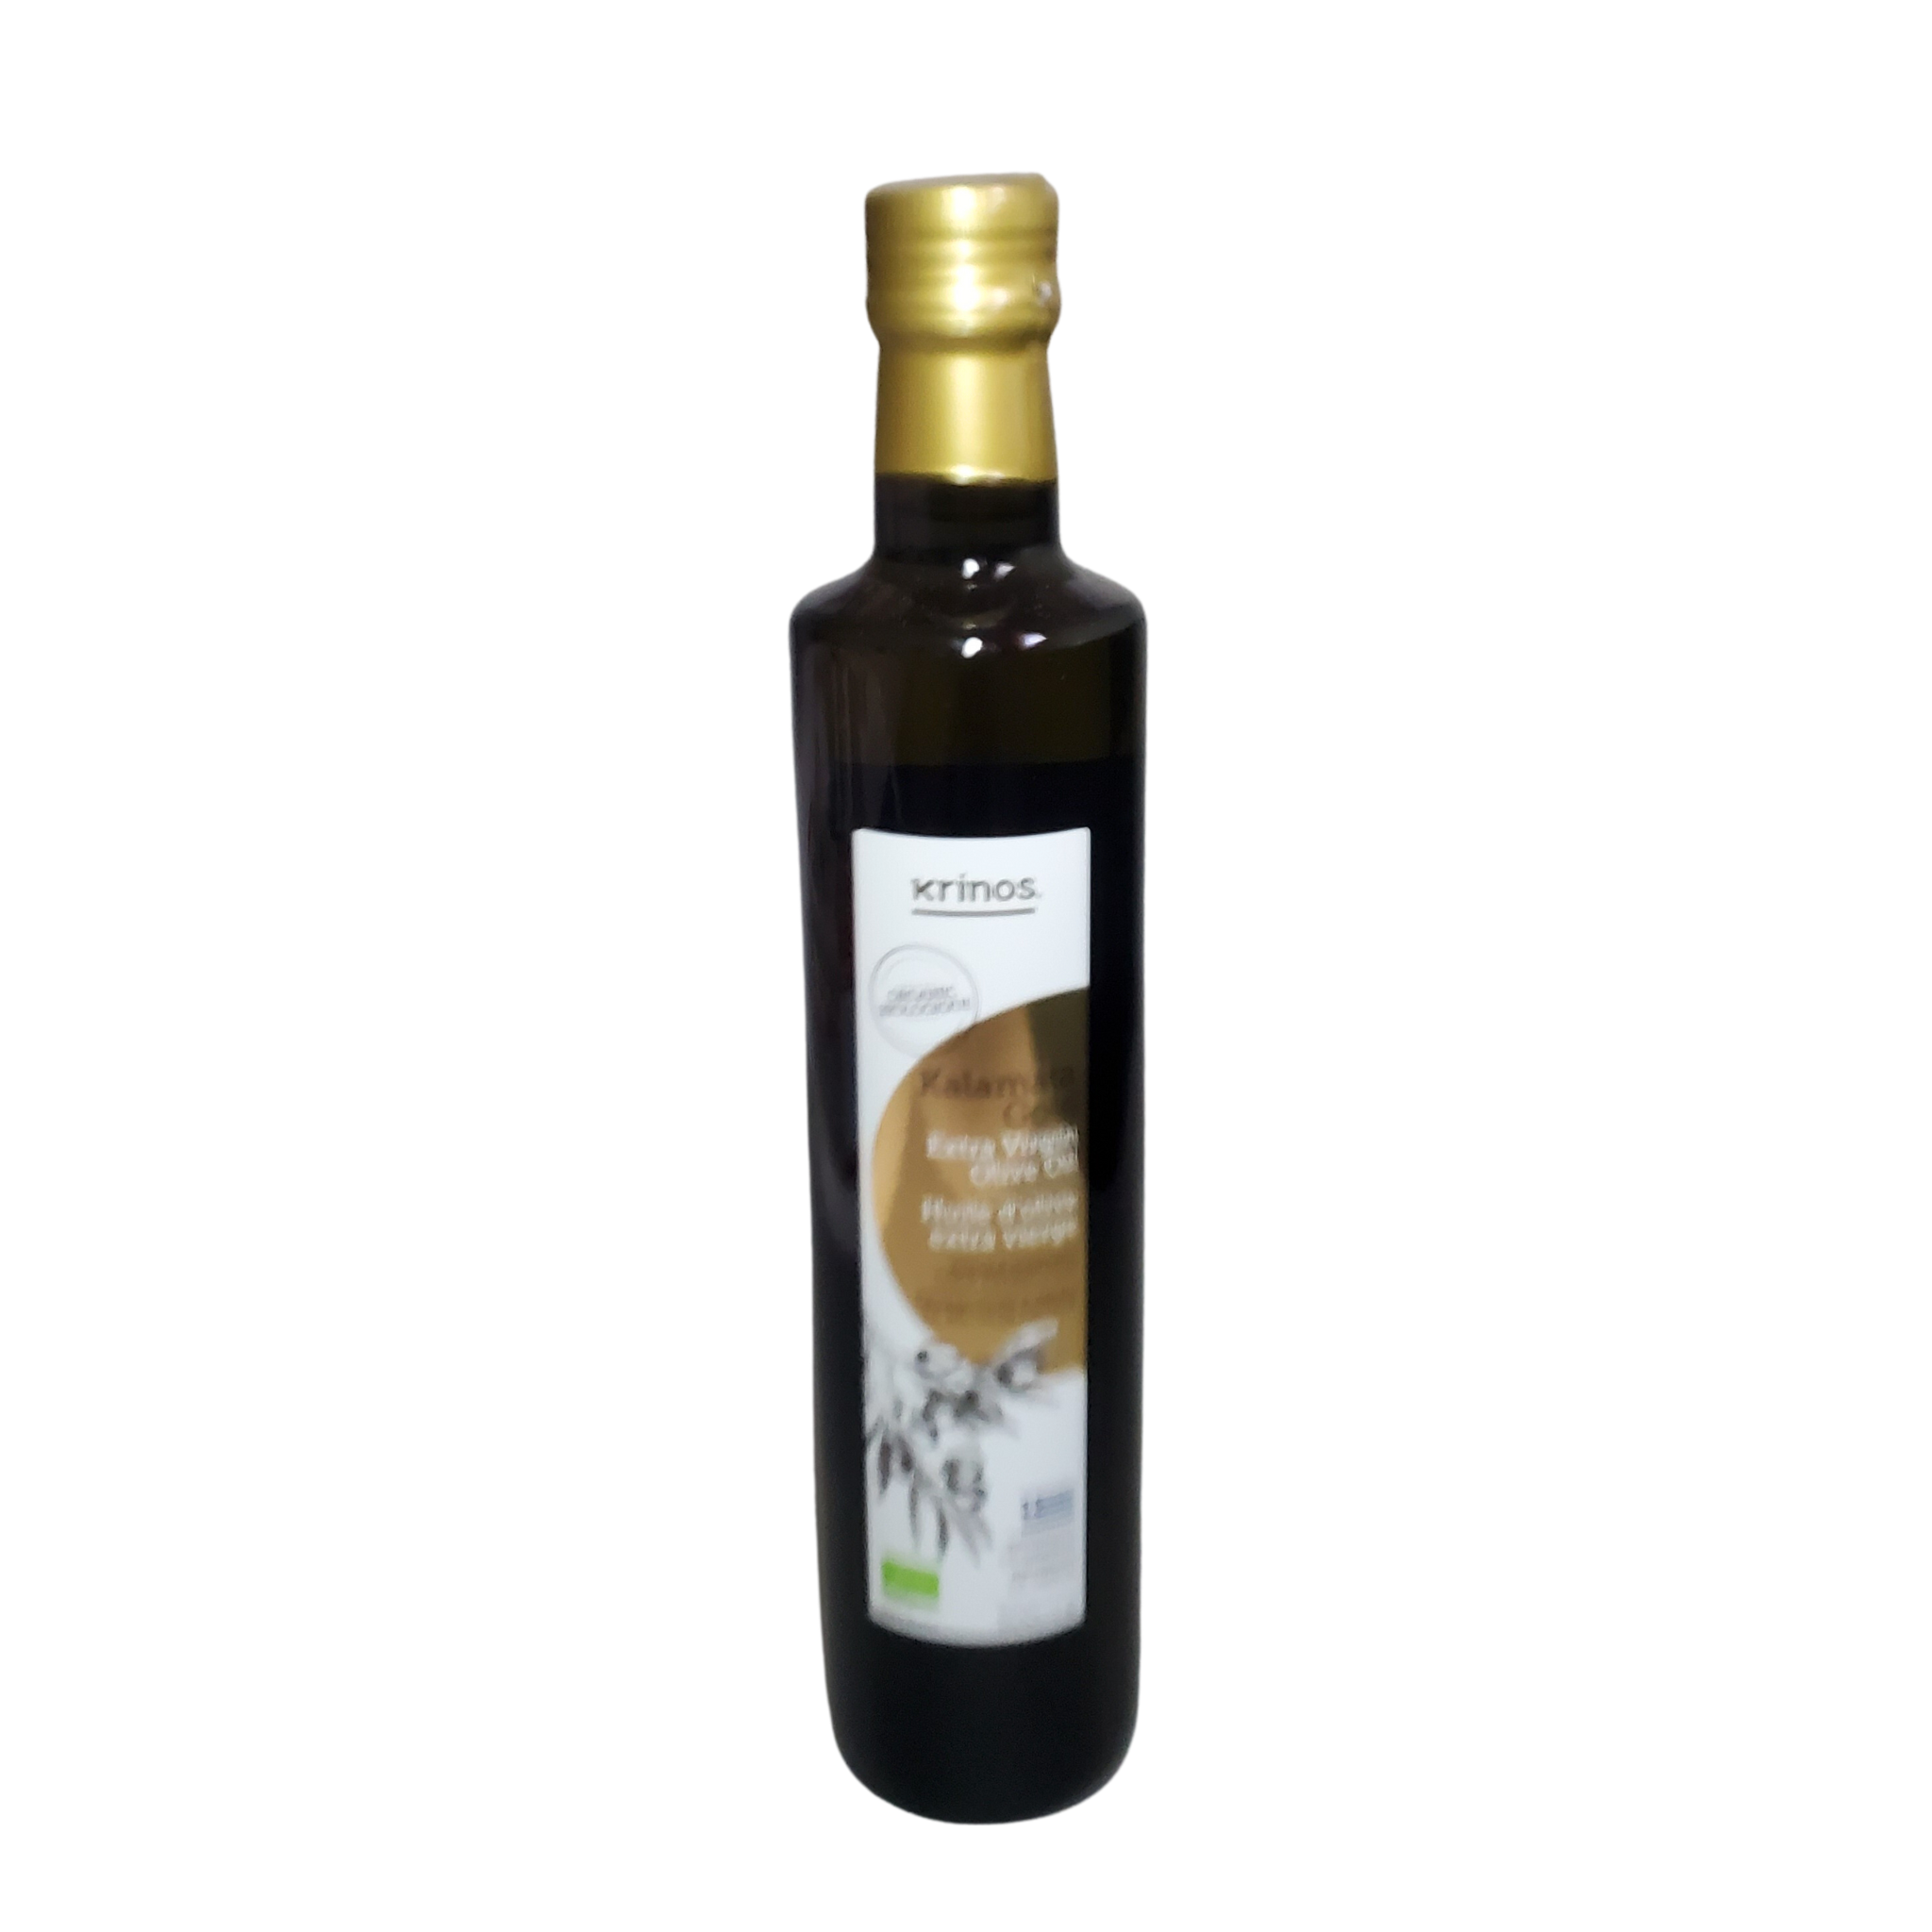 Krinos Organic Kalamata Gold Extra Virgin Olive Oil  500 ml Hand Picked Olives  - Huile d'Olive